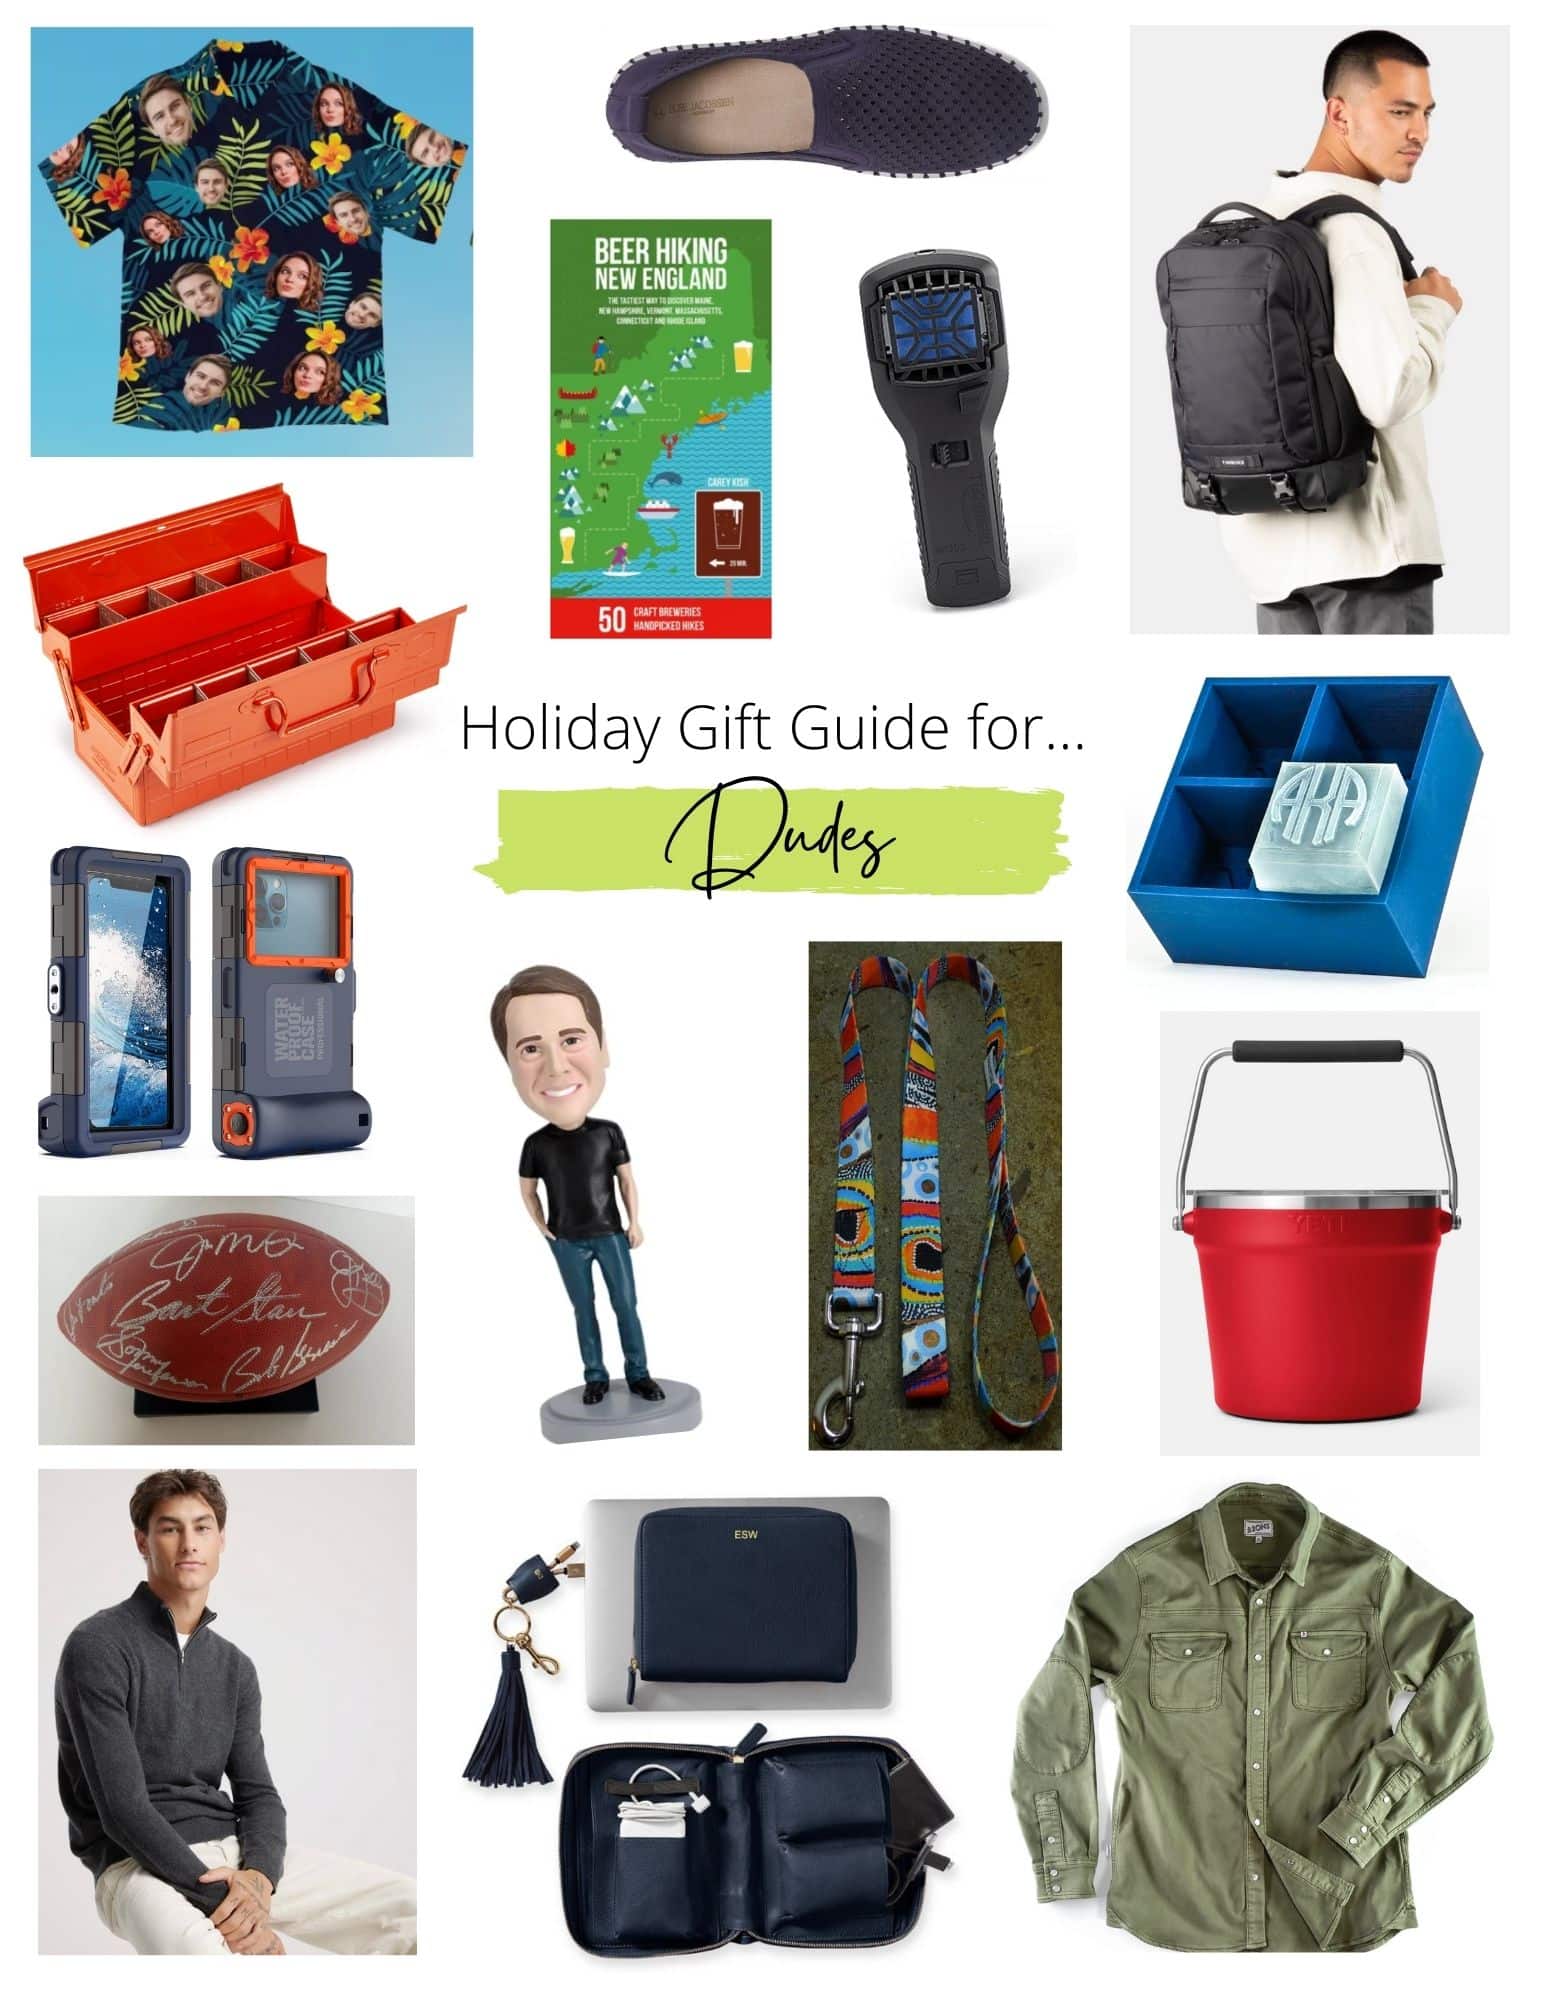 2023 Gift Guide for Him! - How Sweet Eats